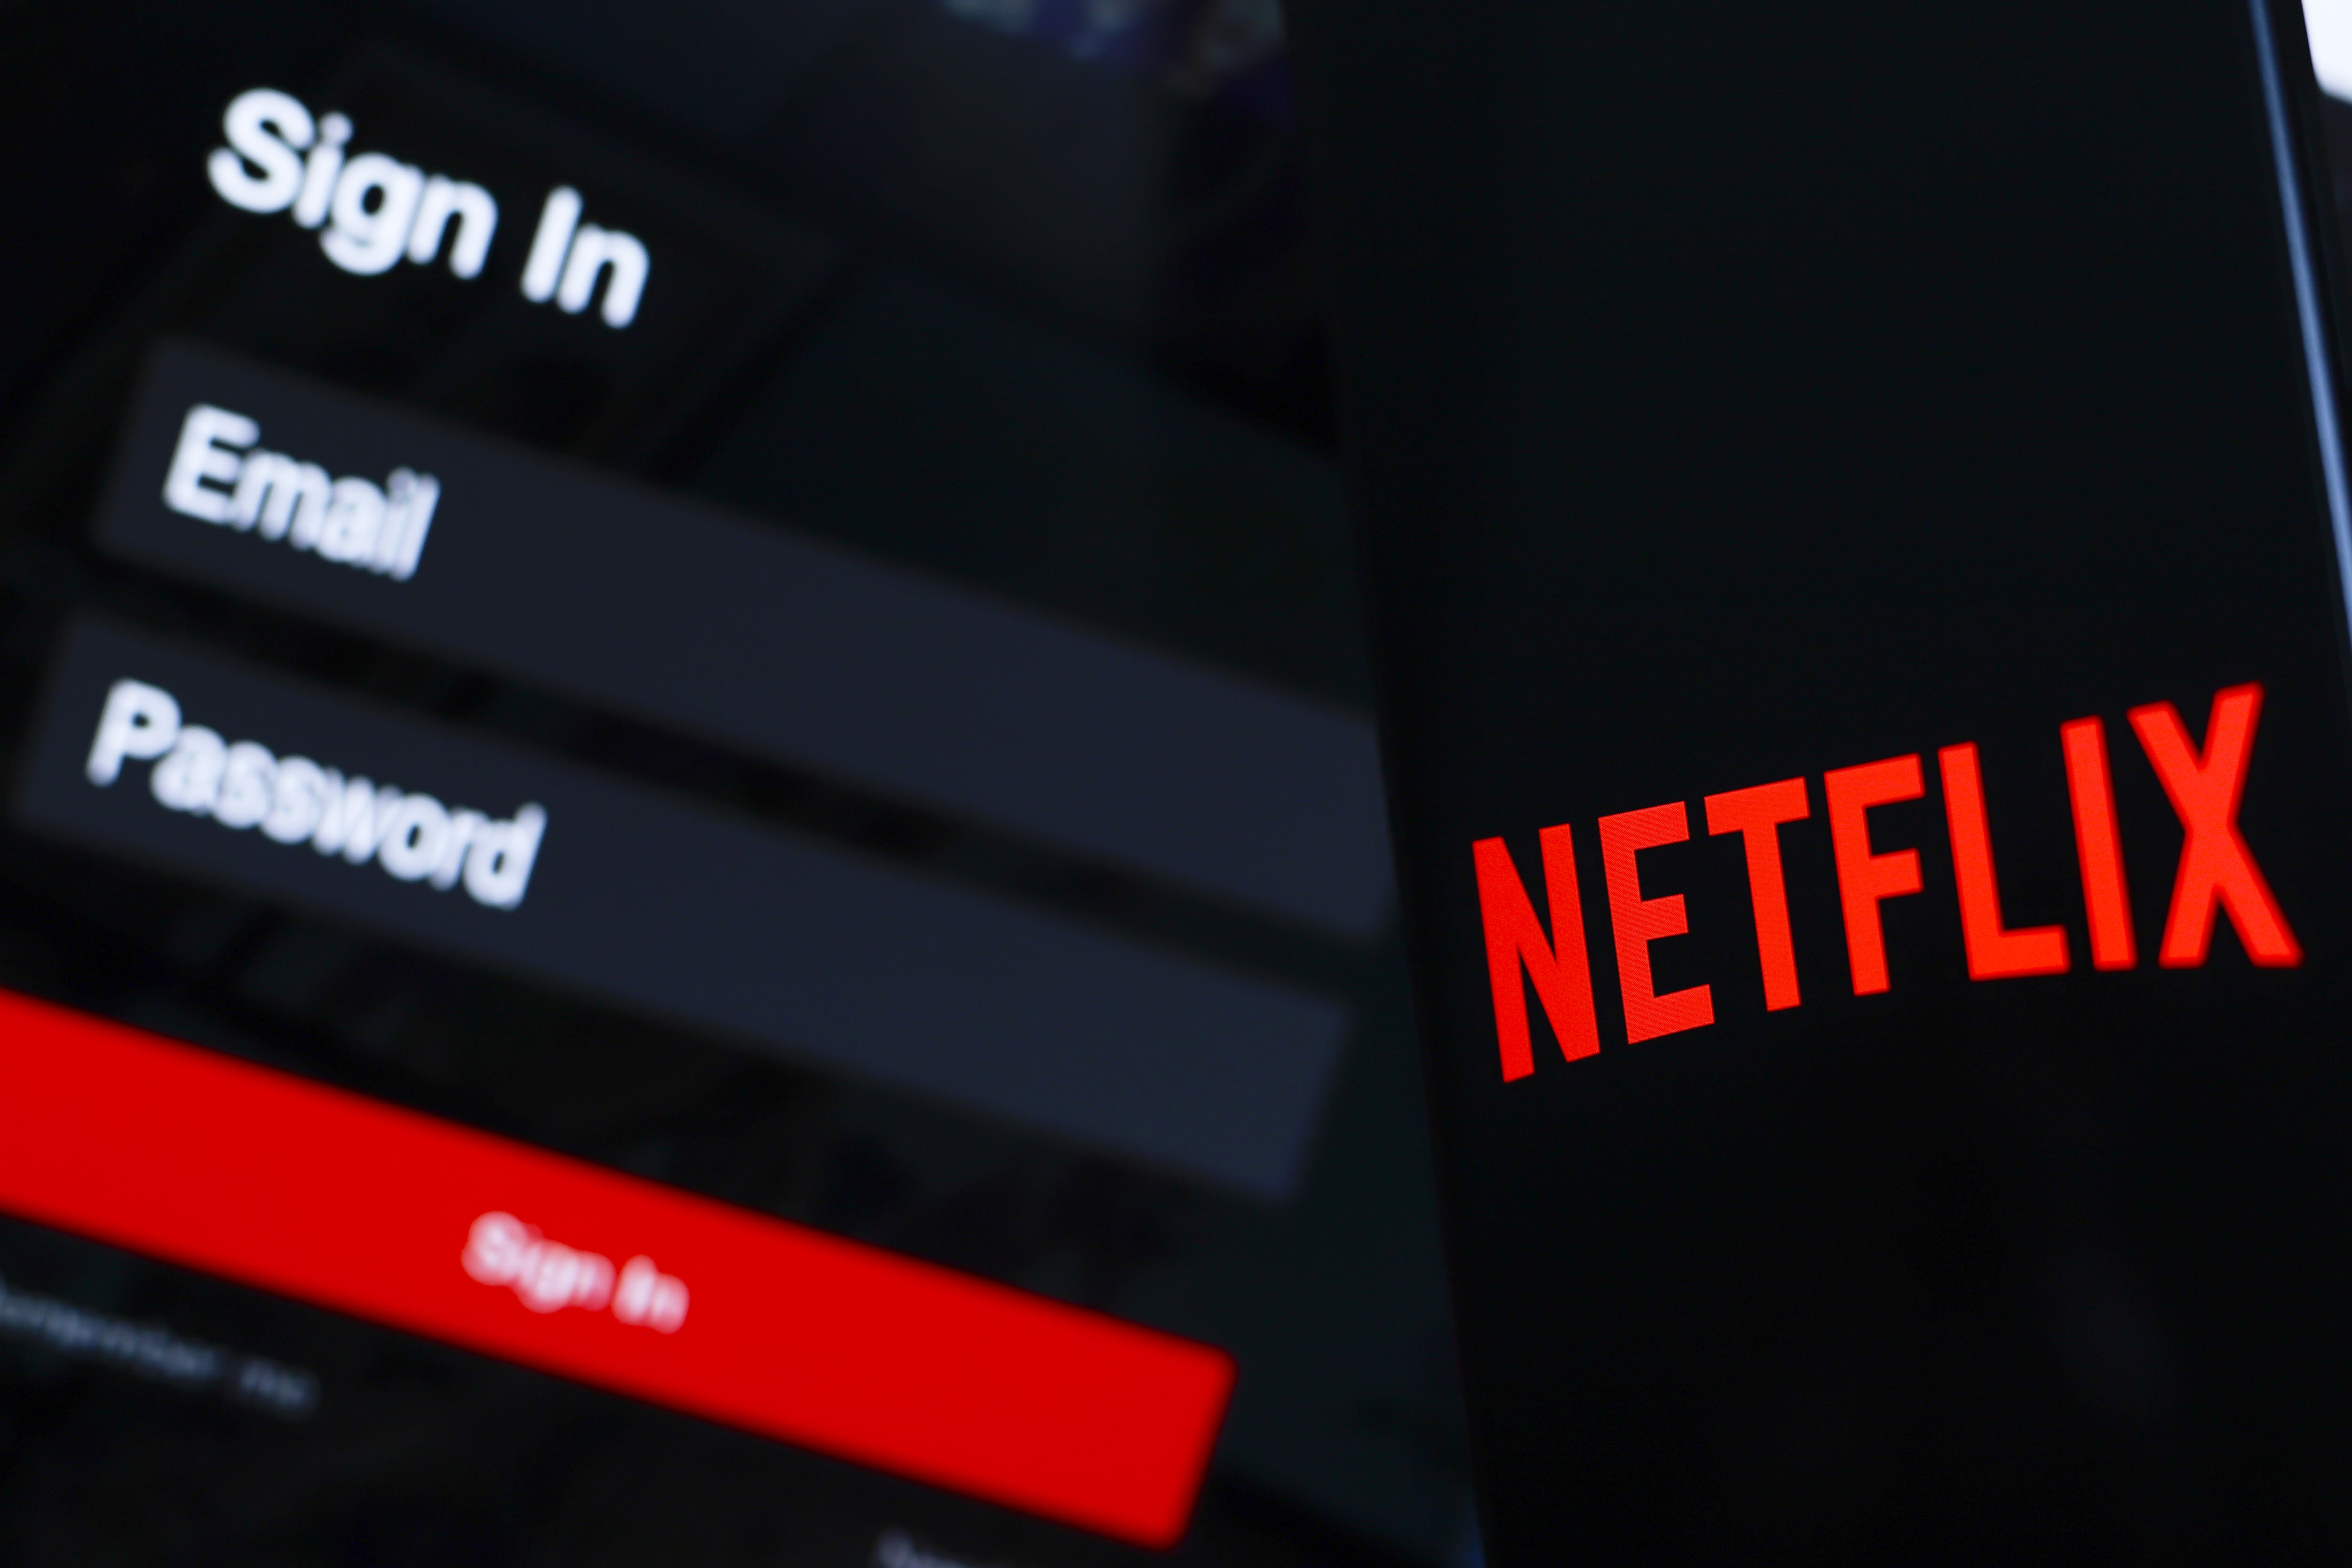 Netflix adds 8 million subscribers, disappoints on revenue outlook